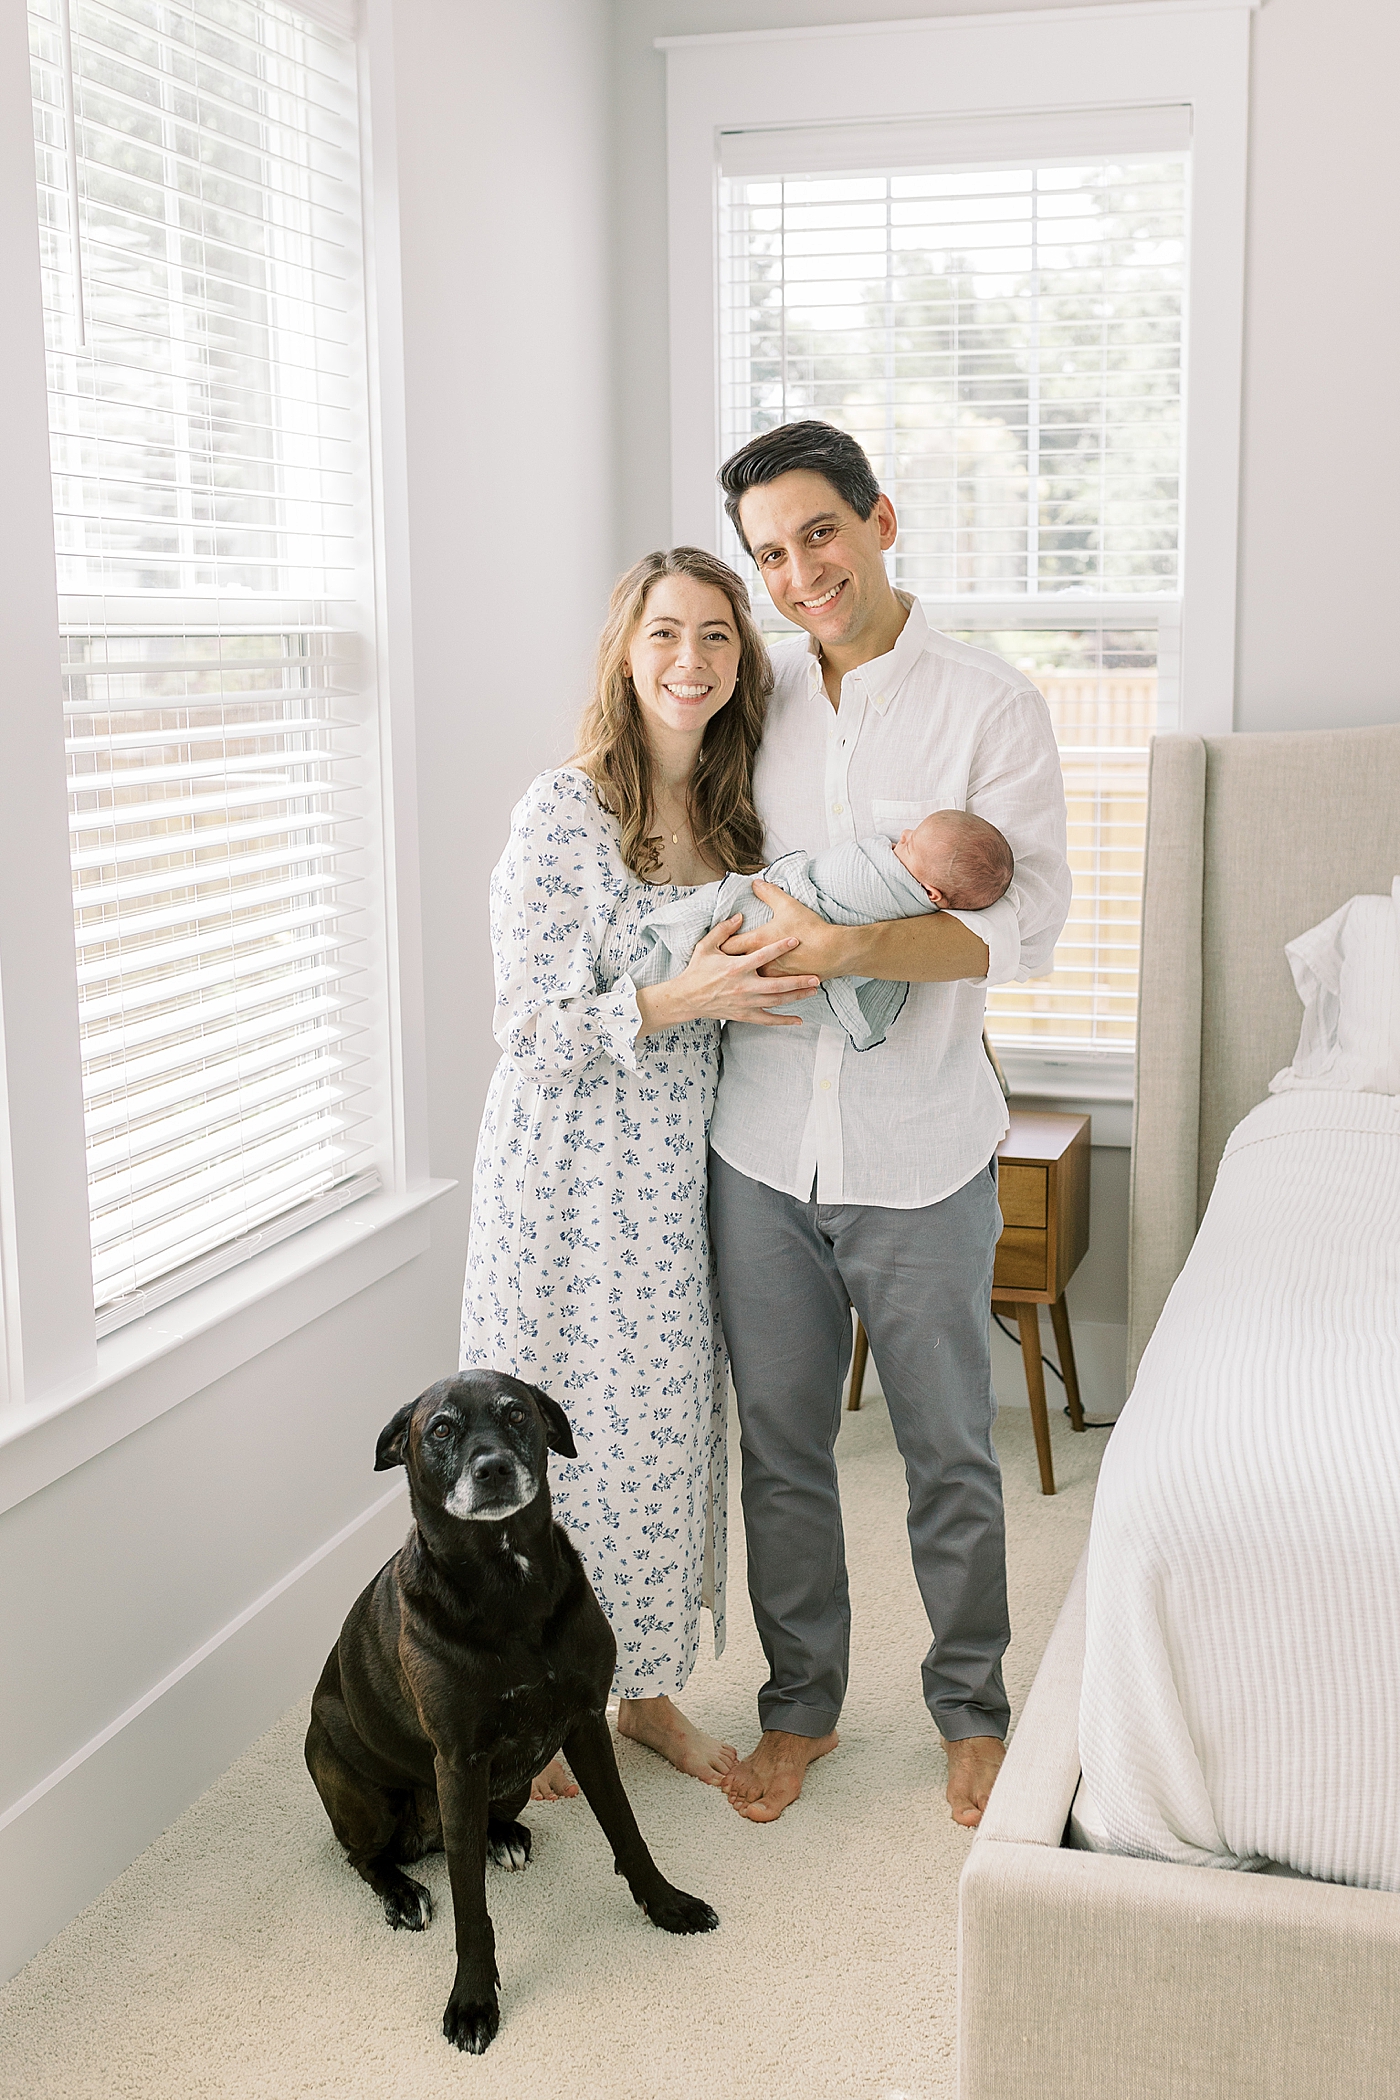 Mom and dad holding their new baby in their bedroom during lifestyle newborn photos | Image by Caitlyn Motycka